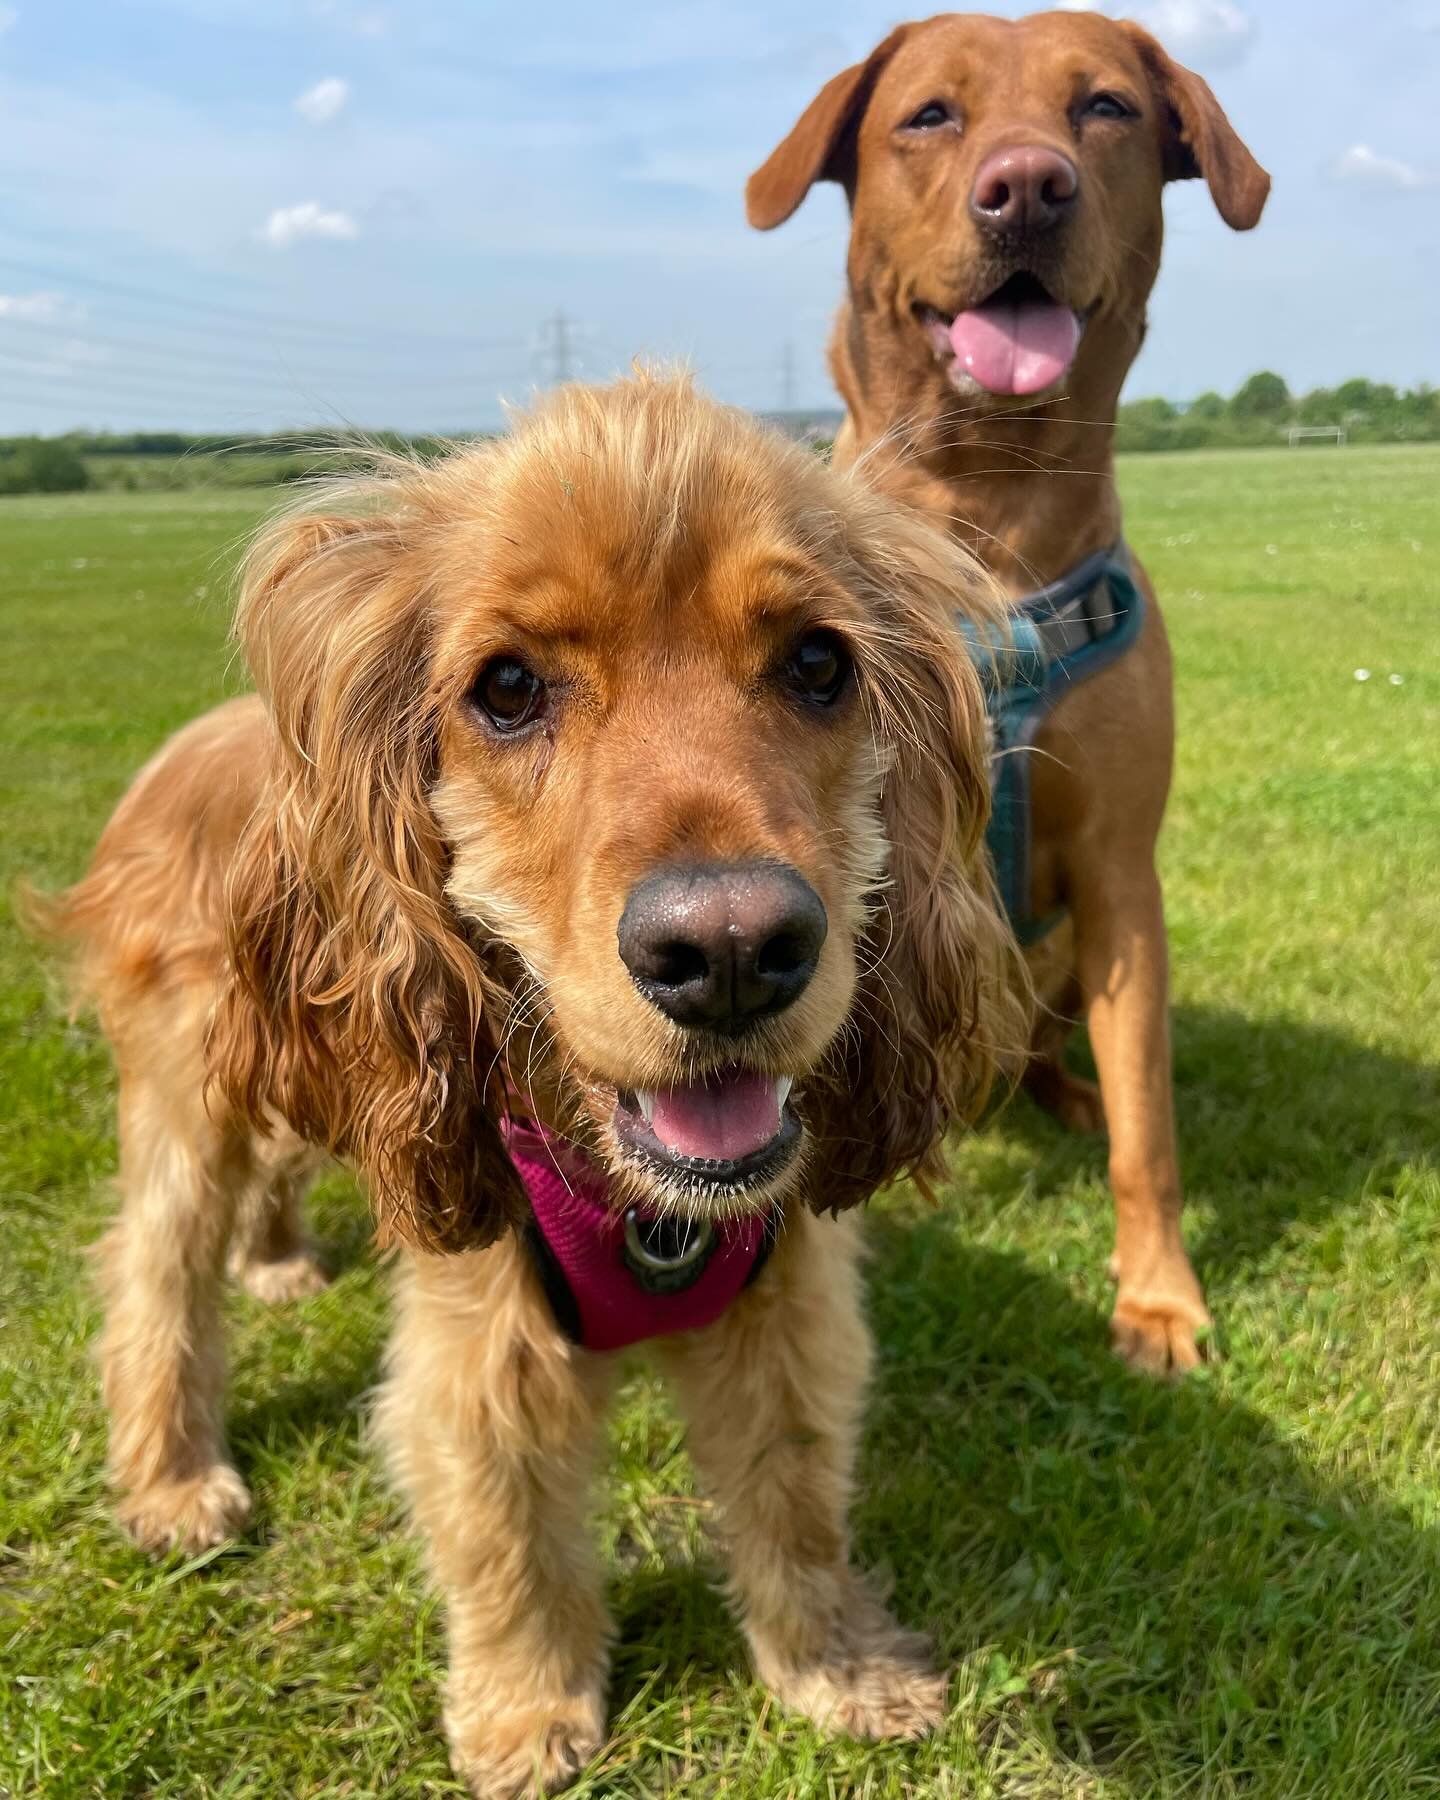 Catching up on Friday&rsquo;s pics!

#dogwalker
#leightonbuzzard&nbsp;#leightonbuzzarddogwalker&nbsp;#dogwalkerleightonbuzzard
#leightonbuzzardbusiness&nbsp;#leightonbuzzardlocal